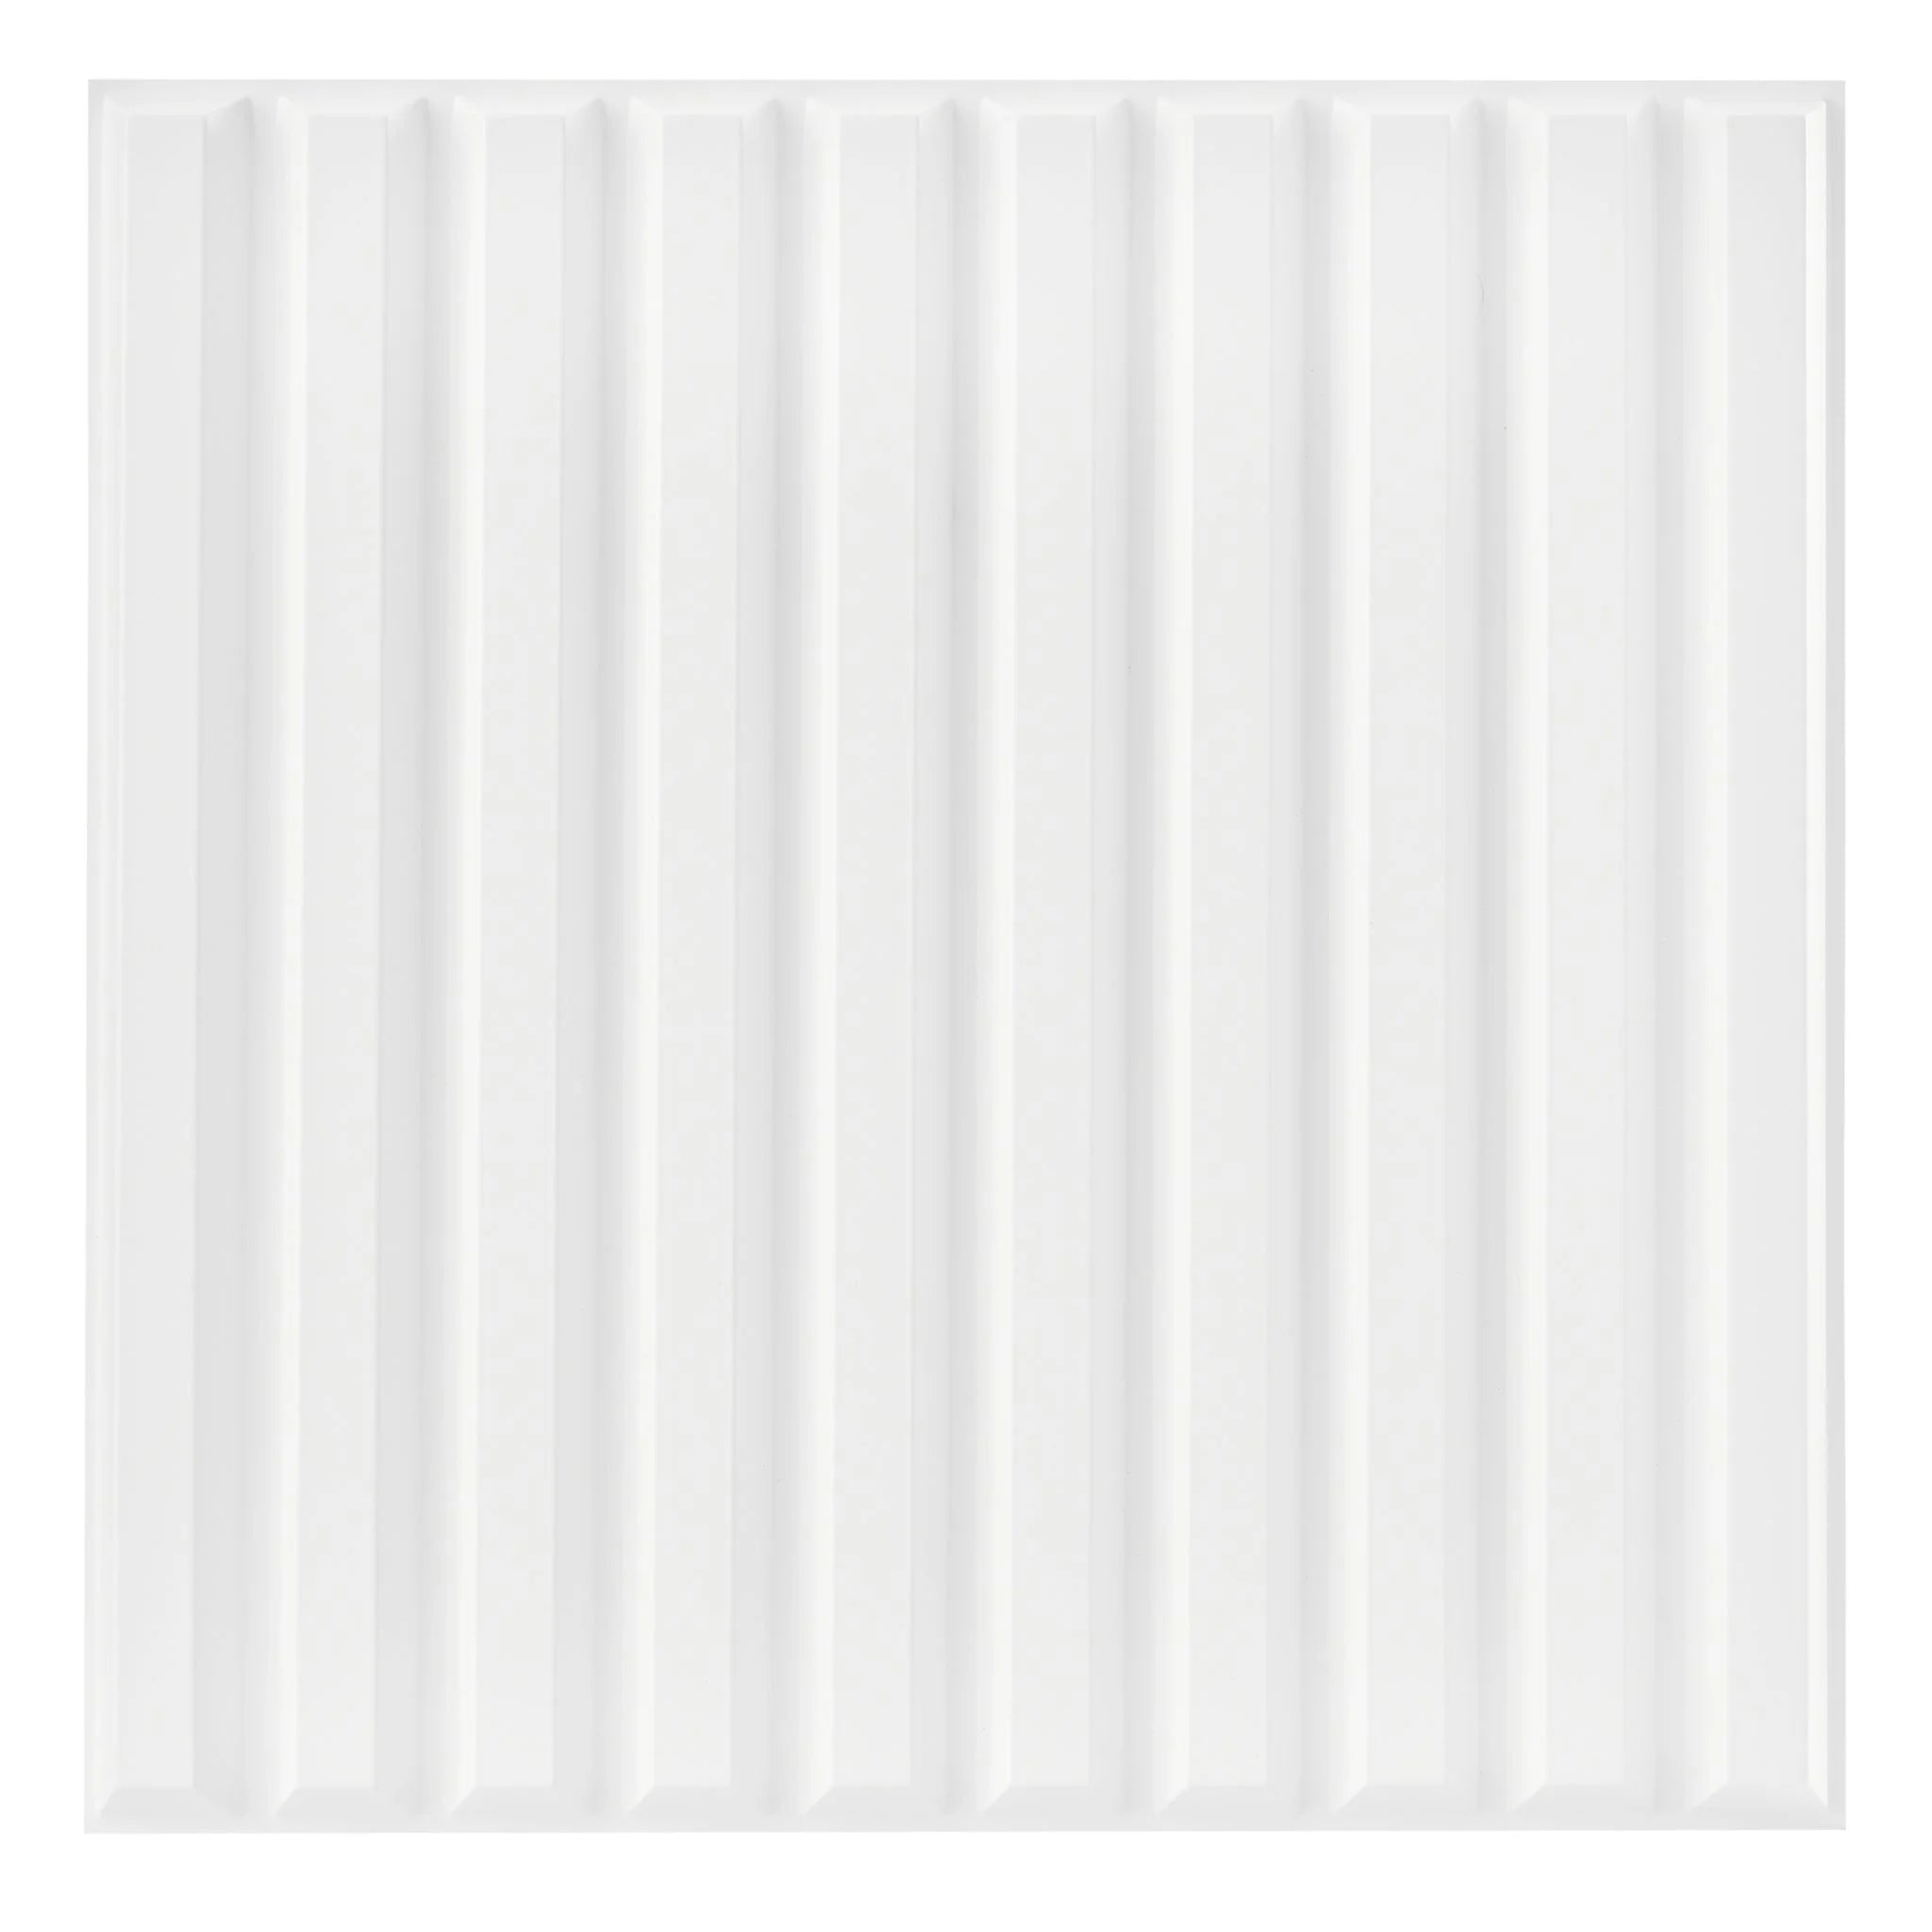 White PVC wall panel with vertical ribbed design